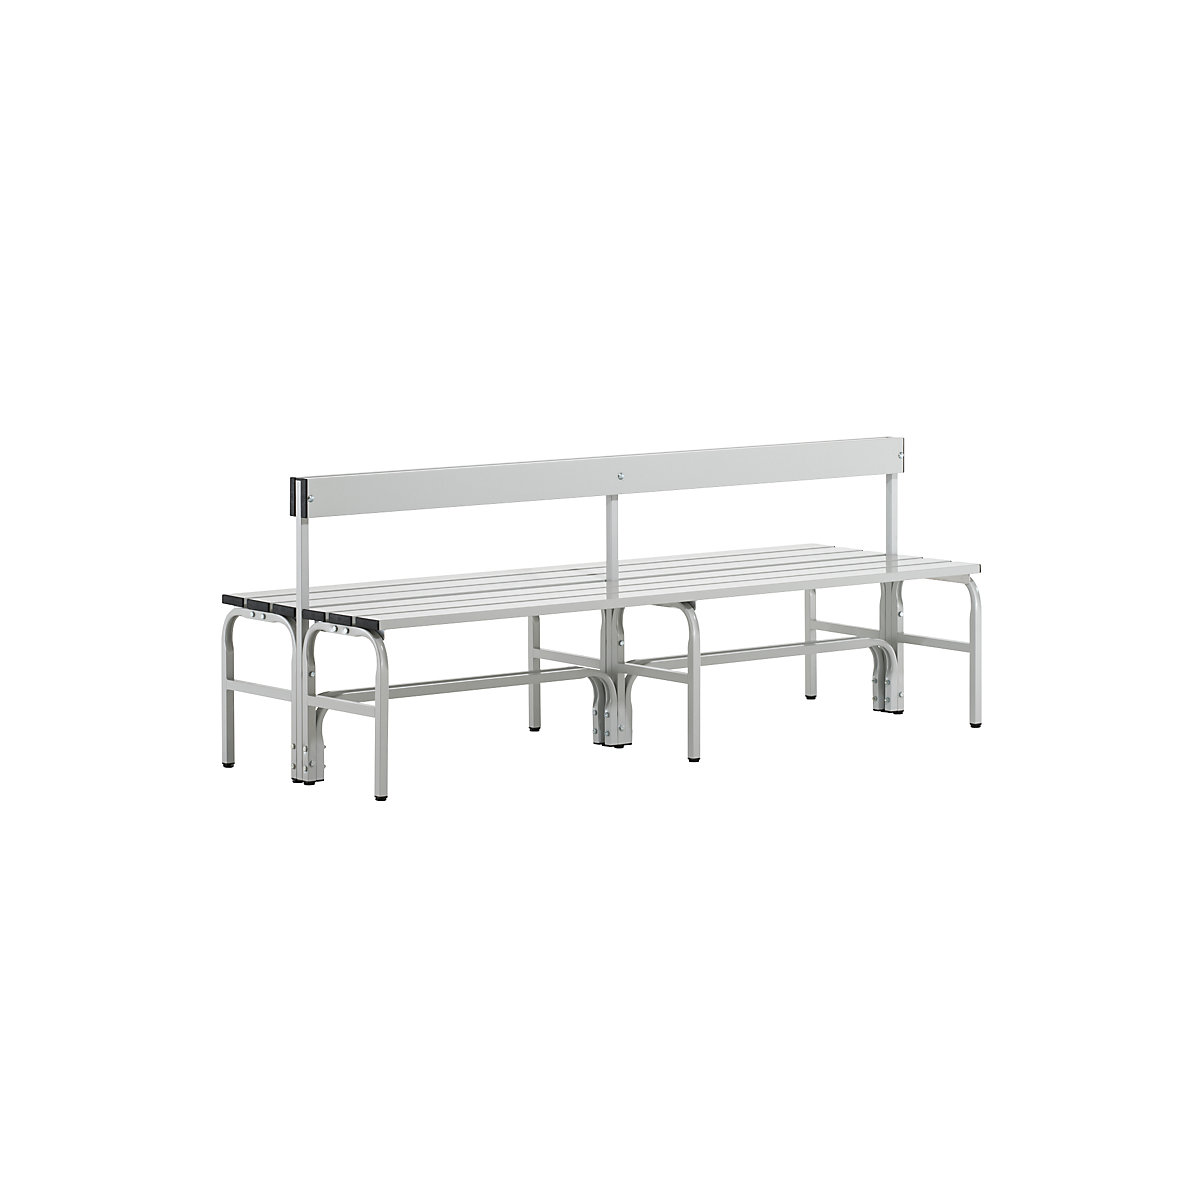 Half height cloakroom bench with back rest, double sided – Sypro, aluminium, length 1500 mm, light grey